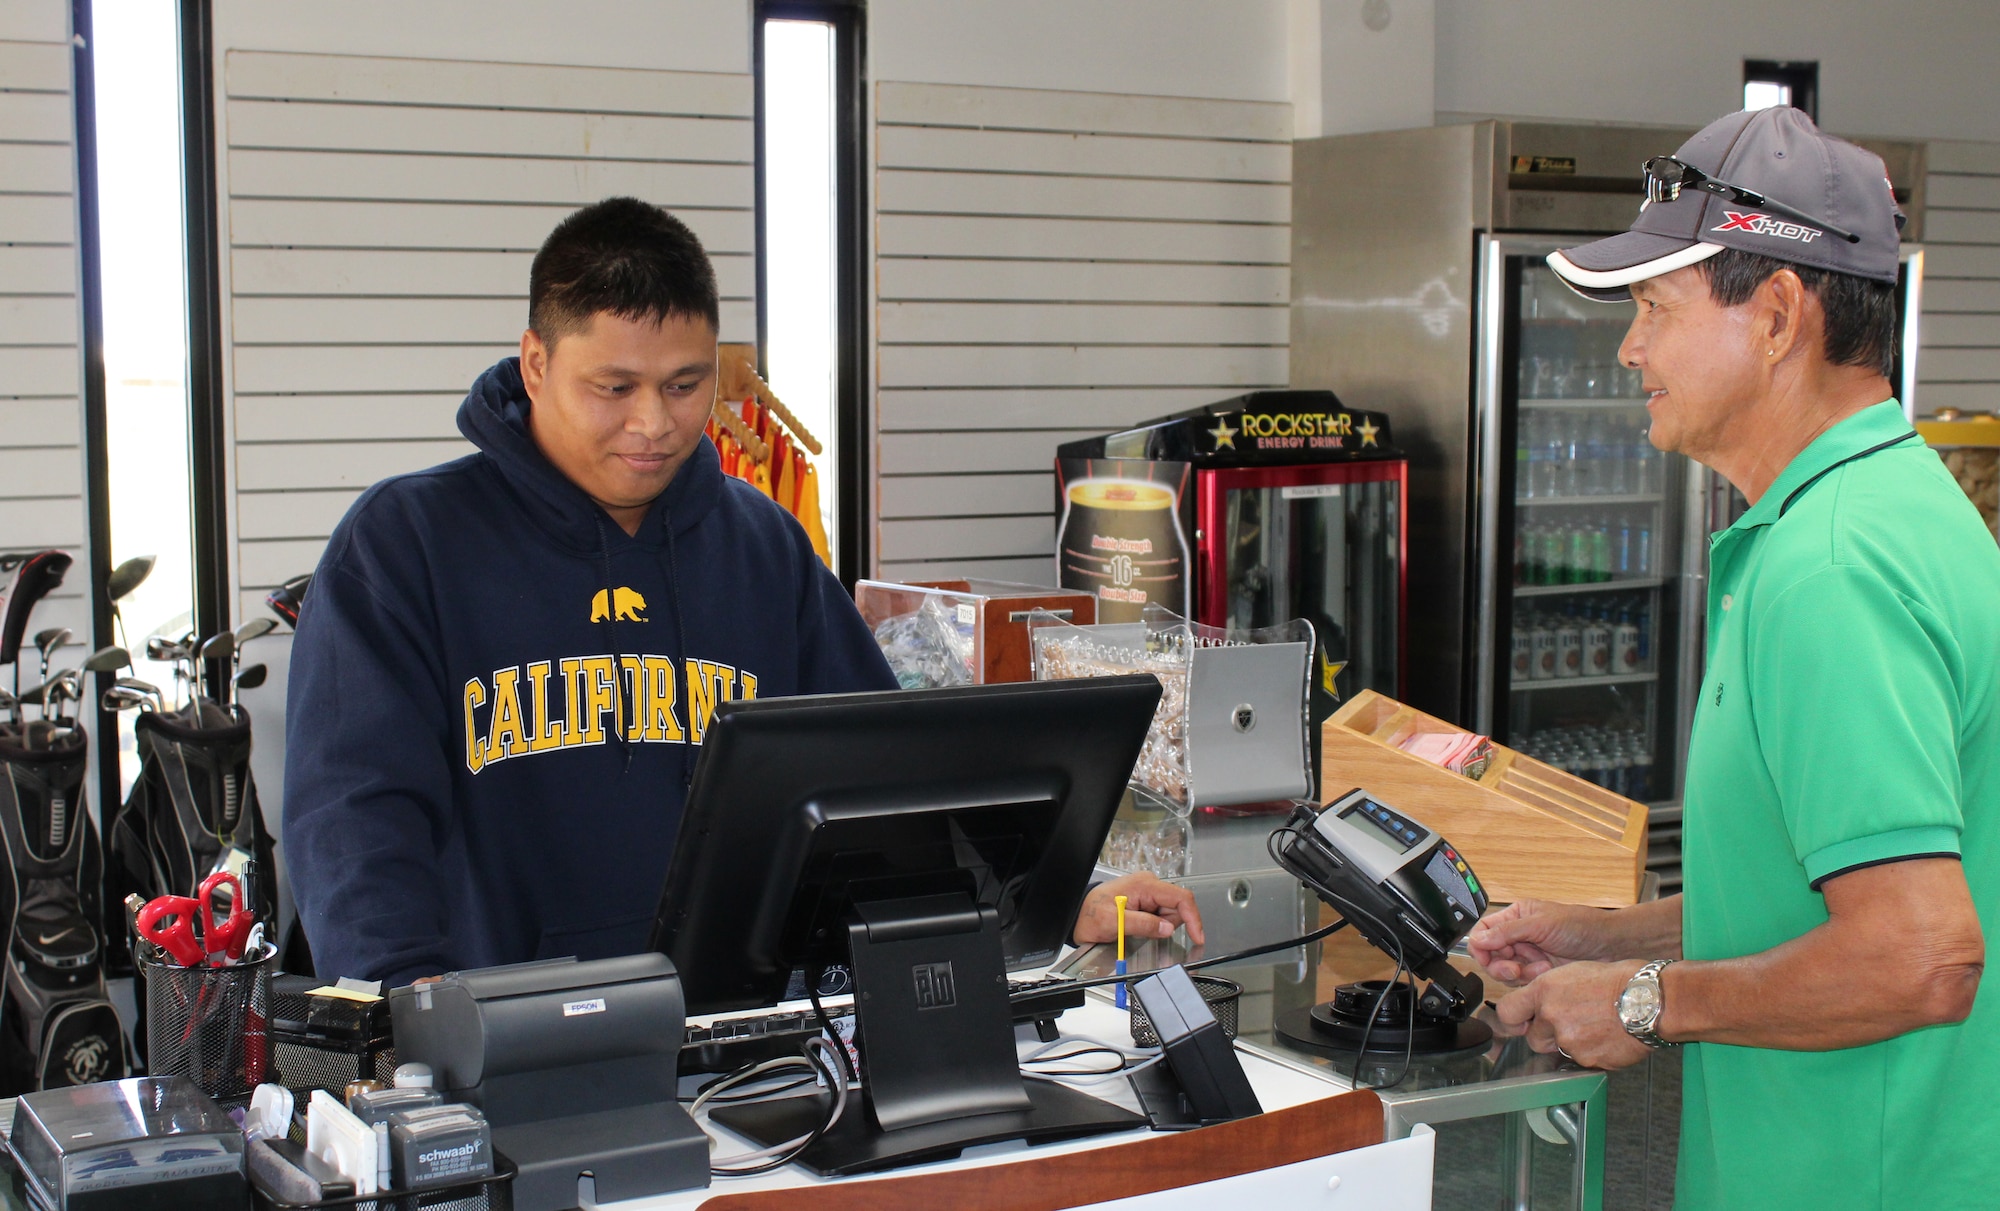 Joel Satur, Palm Tree Golf Course employee, completes a transaction with a customer in the new pro shop Feb. 5, 2015.  Andersen Air Force Base’s Palm Tree Golf Course reopened its golf pro shop in their new location at the Sunrise Conference Center Jan. 31, 2015. (U.S. Air Force photo by 1st Lt. Jessica Clark/Released)